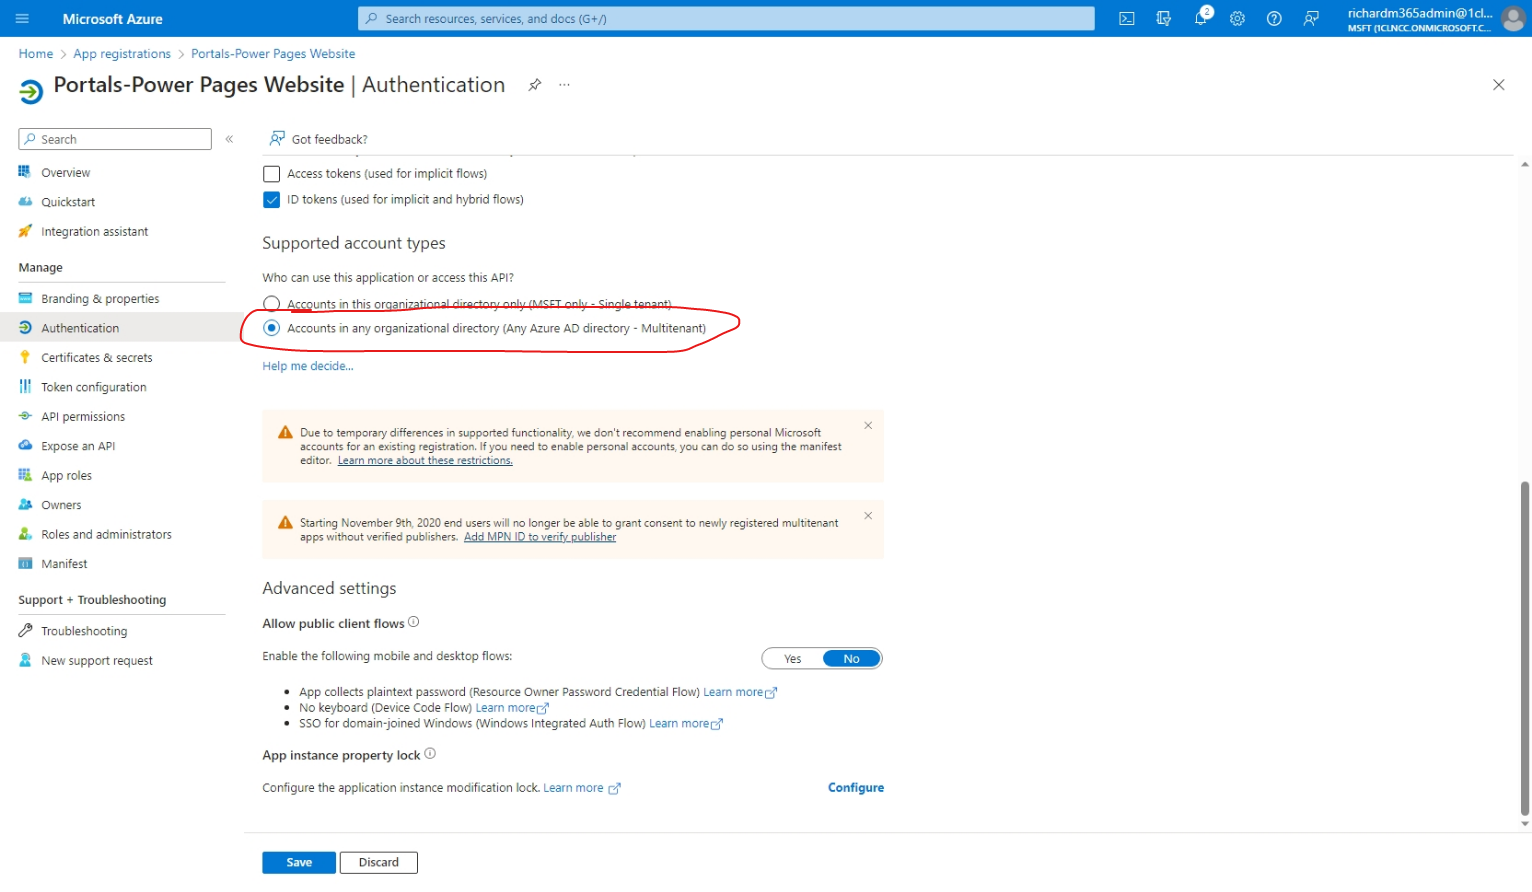 Azure app registration Authentication screen with "Accounts in any organizational directory (Any Azure AD directory - Multitenant)" circled.